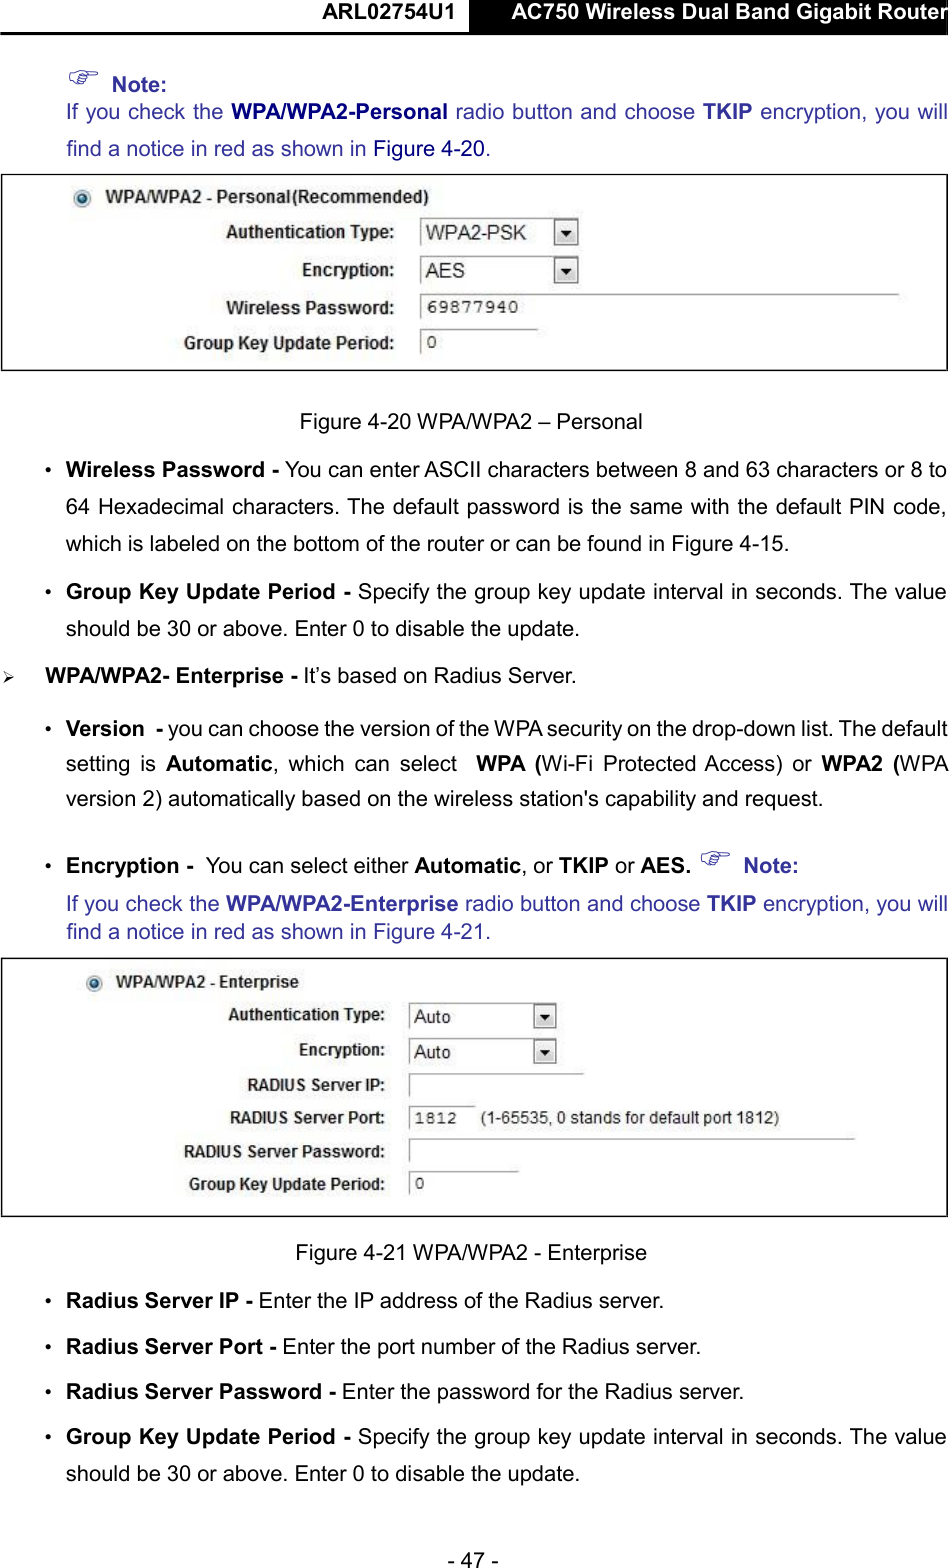  ARL02754U1  AC750 Wireless Dual Band Gigabit Router    - 47 -   Note:   If you check the WPA/WPA2-Personal radio button and choose TKIP encryption, you will find a notice in red as shown in Figure 4-20.   Figure 4-20 WPA/WPA2 – Personal  • Wireless Password - You can enter ASCII characters between 8 and 63 characters or 8 to 64 Hexadecimal characters. The default password is the same with the default PIN code, which is labeled on the bottom of the router or can be found in Figure 4-15.  • Group Key Update Period - Specify the group key update interval in seconds. The value should be 30 or above. Enter 0 to disable the update.   WPA/WPA2- Enterprise - It’s based on Radius Server.  • Version - you can choose the version of the WPA security on the drop-down list. The default setting  is  Automatic,  which  can  select WPA  (Wi-Fi  Protected Access)  or  WPA2  (WPA version 2) automatically based on the wireless station&apos;s capability and request.  • Encryption - You can select either Automatic, or TKIP or AES.  Note:  If you check the WPA/WPA2-Enterprise radio button and choose TKIP encryption, you will find a notice in red as shown in Figure 4-21.   Figure 4-21 WPA/WPA2 - Enterprise  • Radius Server IP - Enter the IP address of the Radius server.  • Radius Server Port - Enter the port number of the Radius server.  • Radius Server Password - Enter the password for the Radius server.  • Group Key Update Period - Specify the group key update interval in seconds. The value should be 30 or above. Enter 0 to disable the update.      